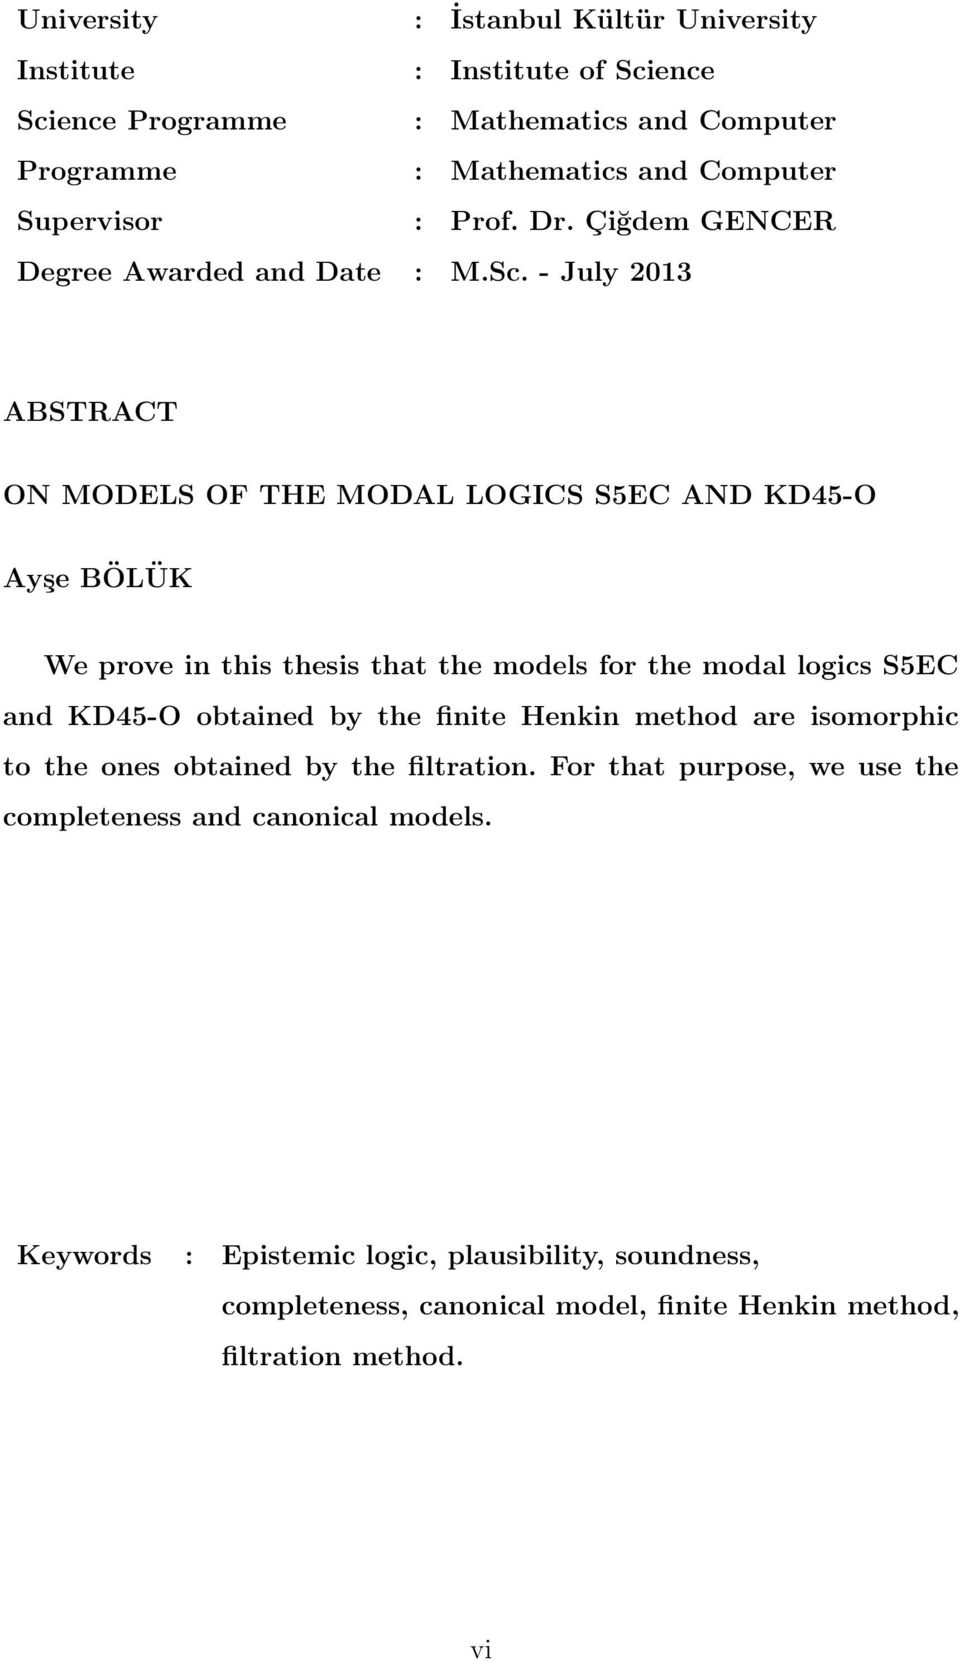 - July 2013 ABSTRACT ON MODELS OF THE MODAL LOGICS S5EC AND KD45-O Ayşe BÖLÜK We prove in this thesis that the models for the modal logics S5EC and KD45-O obtained